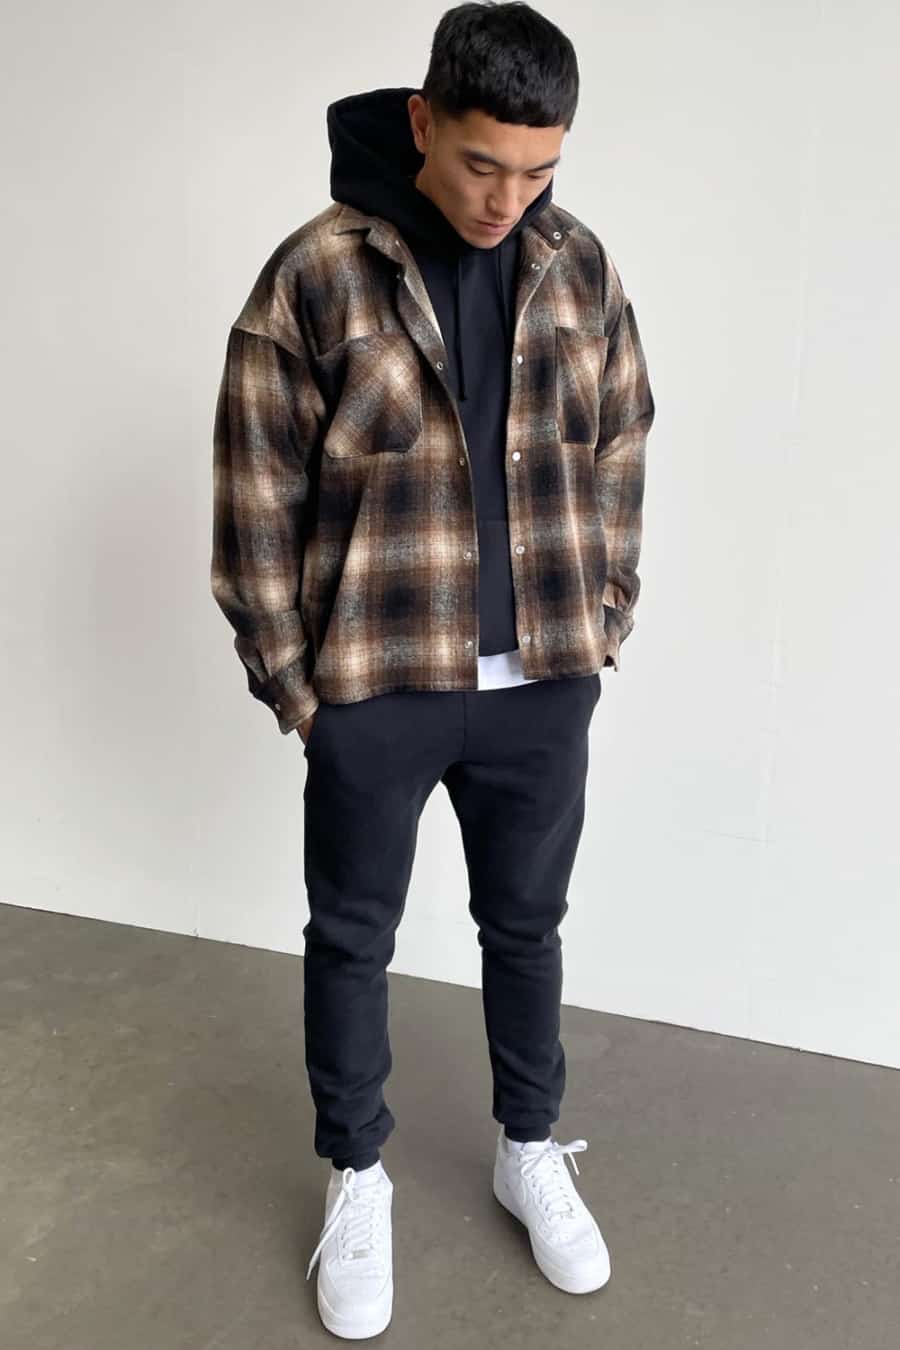 Men's black joggers, black hoodie, brown check flannel shirt and white sneakers outfit